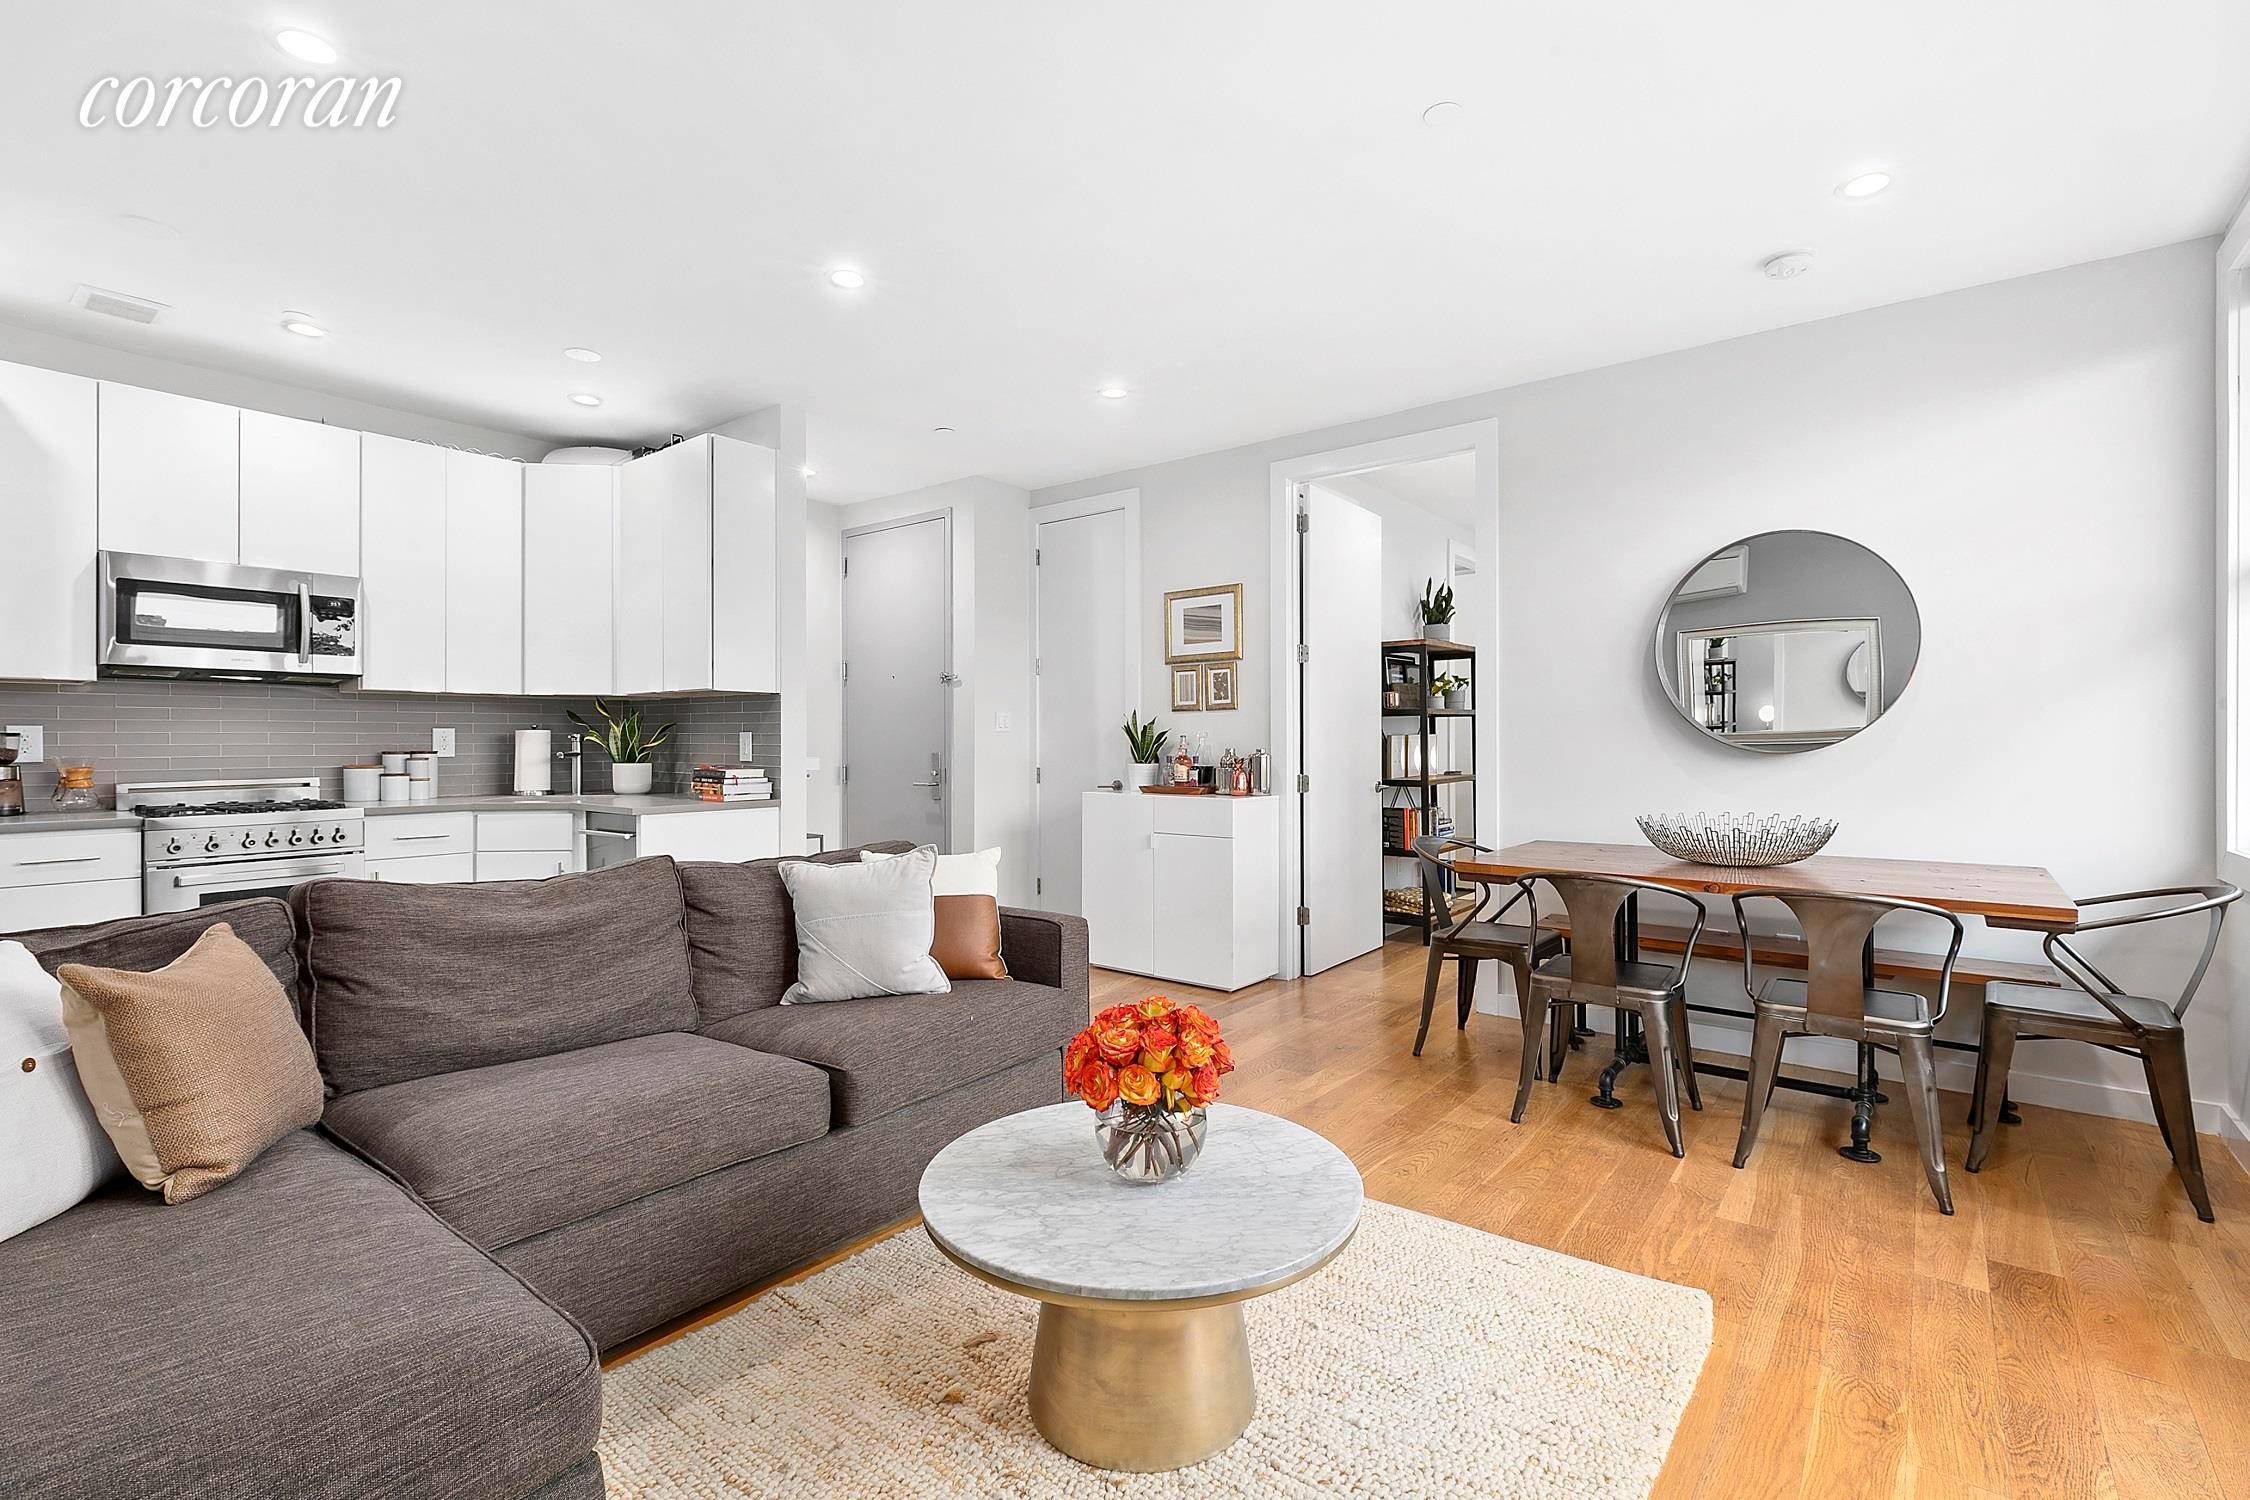 Two spacious bedrooms, two modern and sleek bathrooms, two bodacious balconies, and a wall of wonderful windows, Welcome to apartment 4B at 1149 Bedford Avenue.